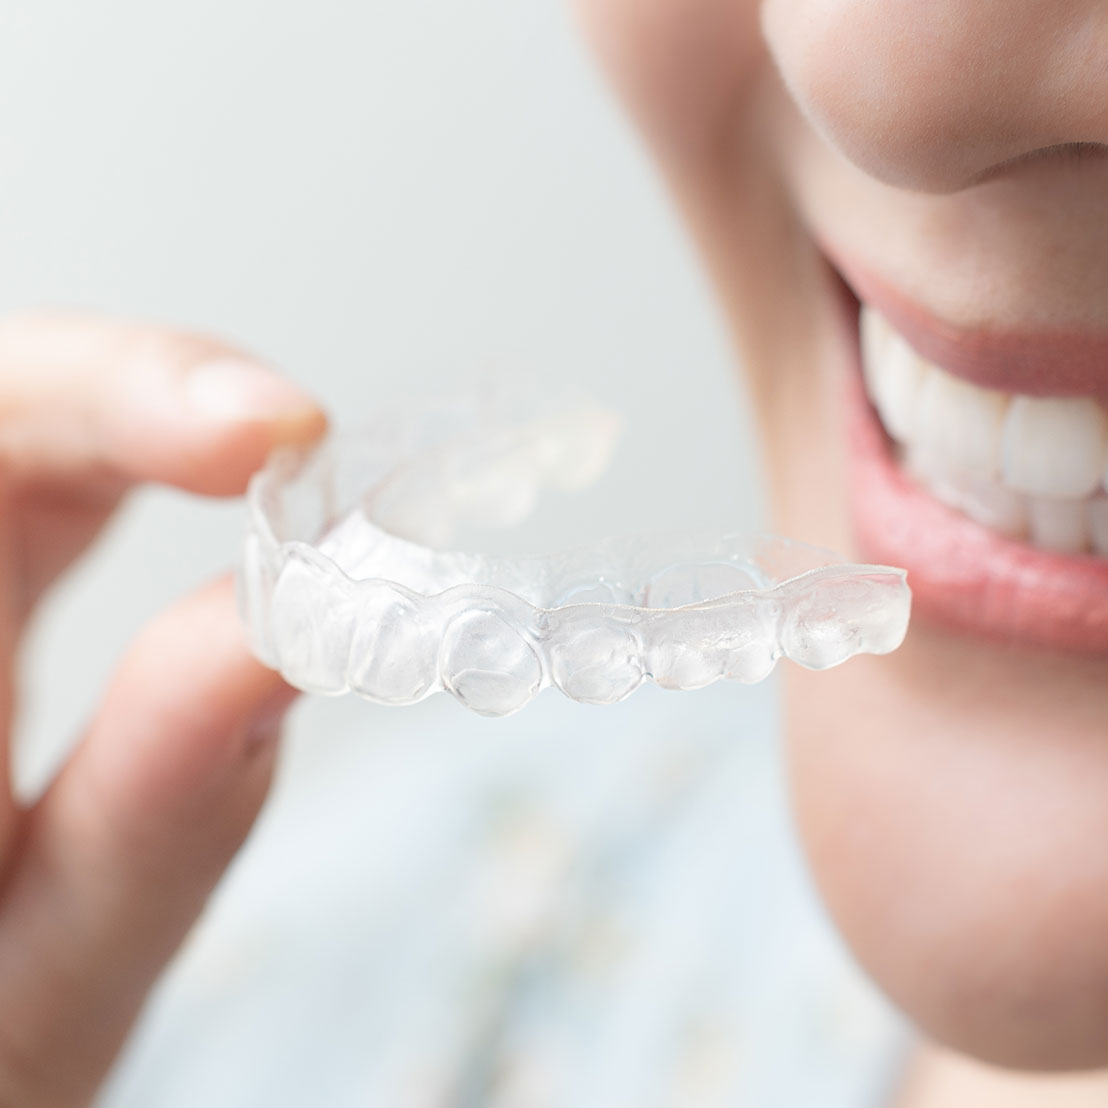 Making the Choice Between Metal Braces and Invisalign™